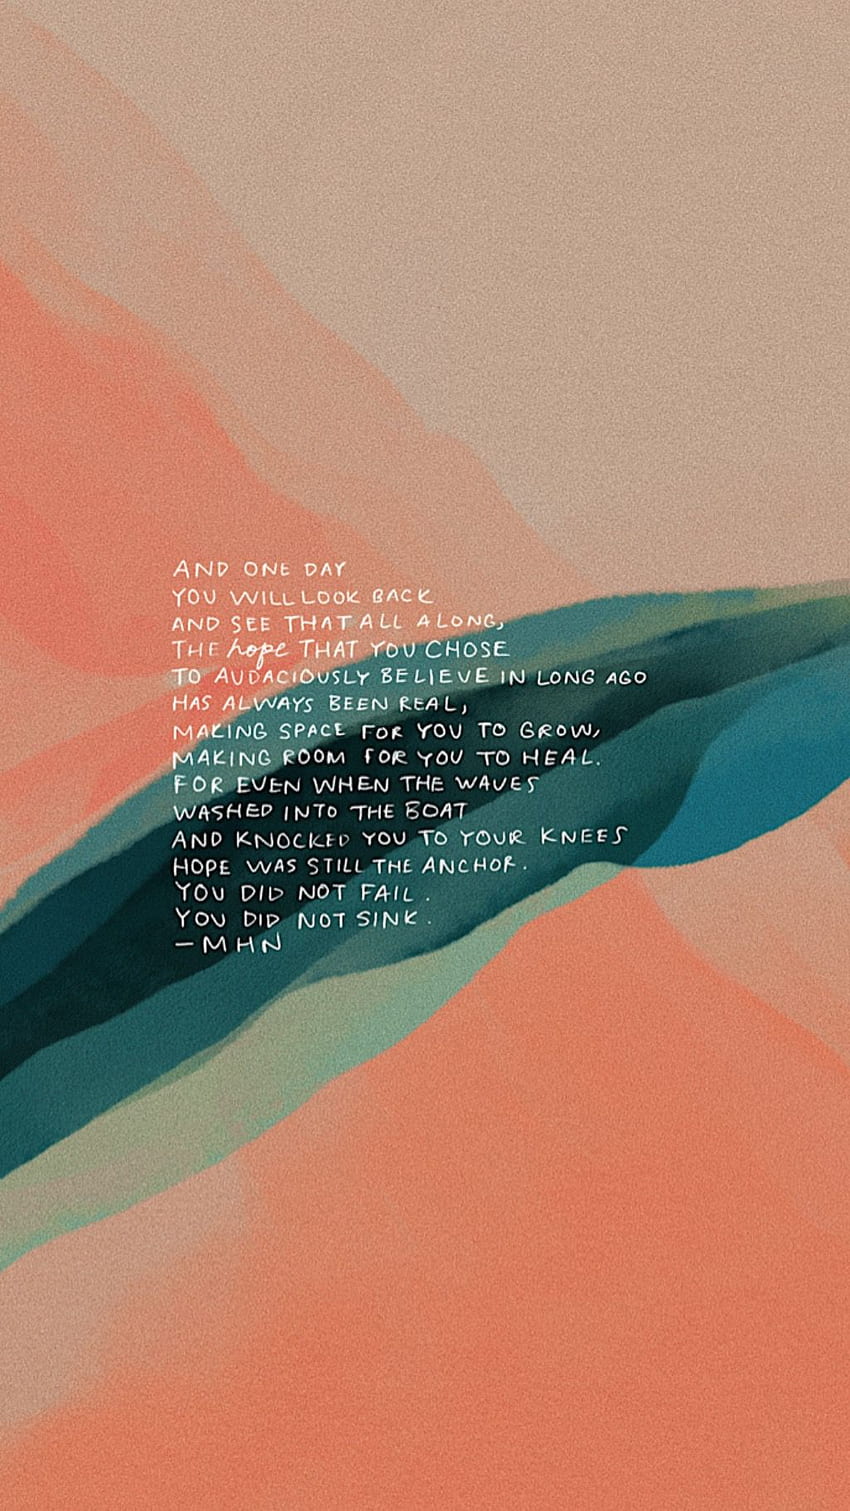 Hope by Morgan Harper Nichols. Hope poems, Encouragement quotes, Hope, Disappointed HD phone wallpaper